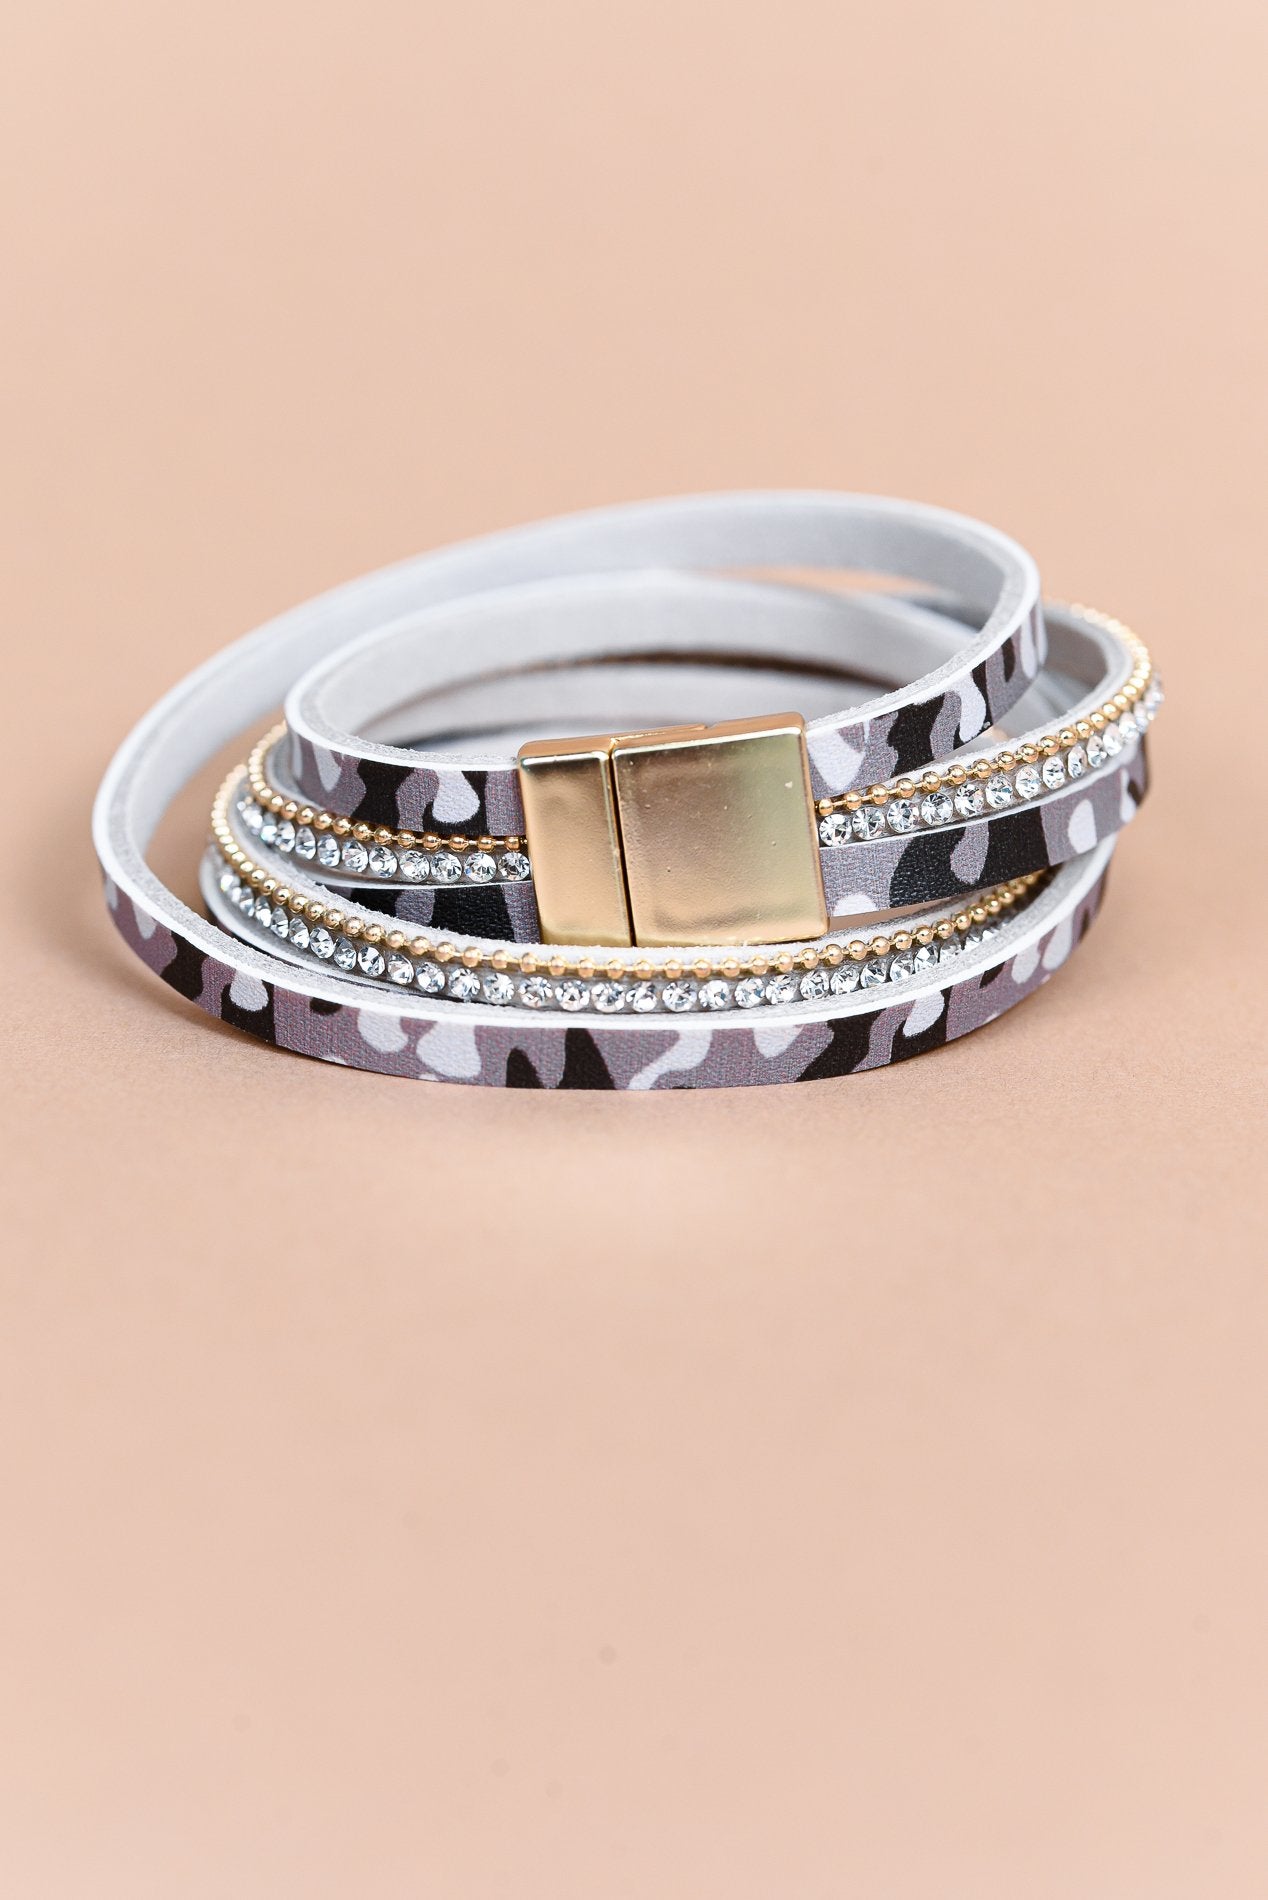 Gray/Camouflage/Bling/Wrapped Magnetic Closure Bracelet - BRC3102GR